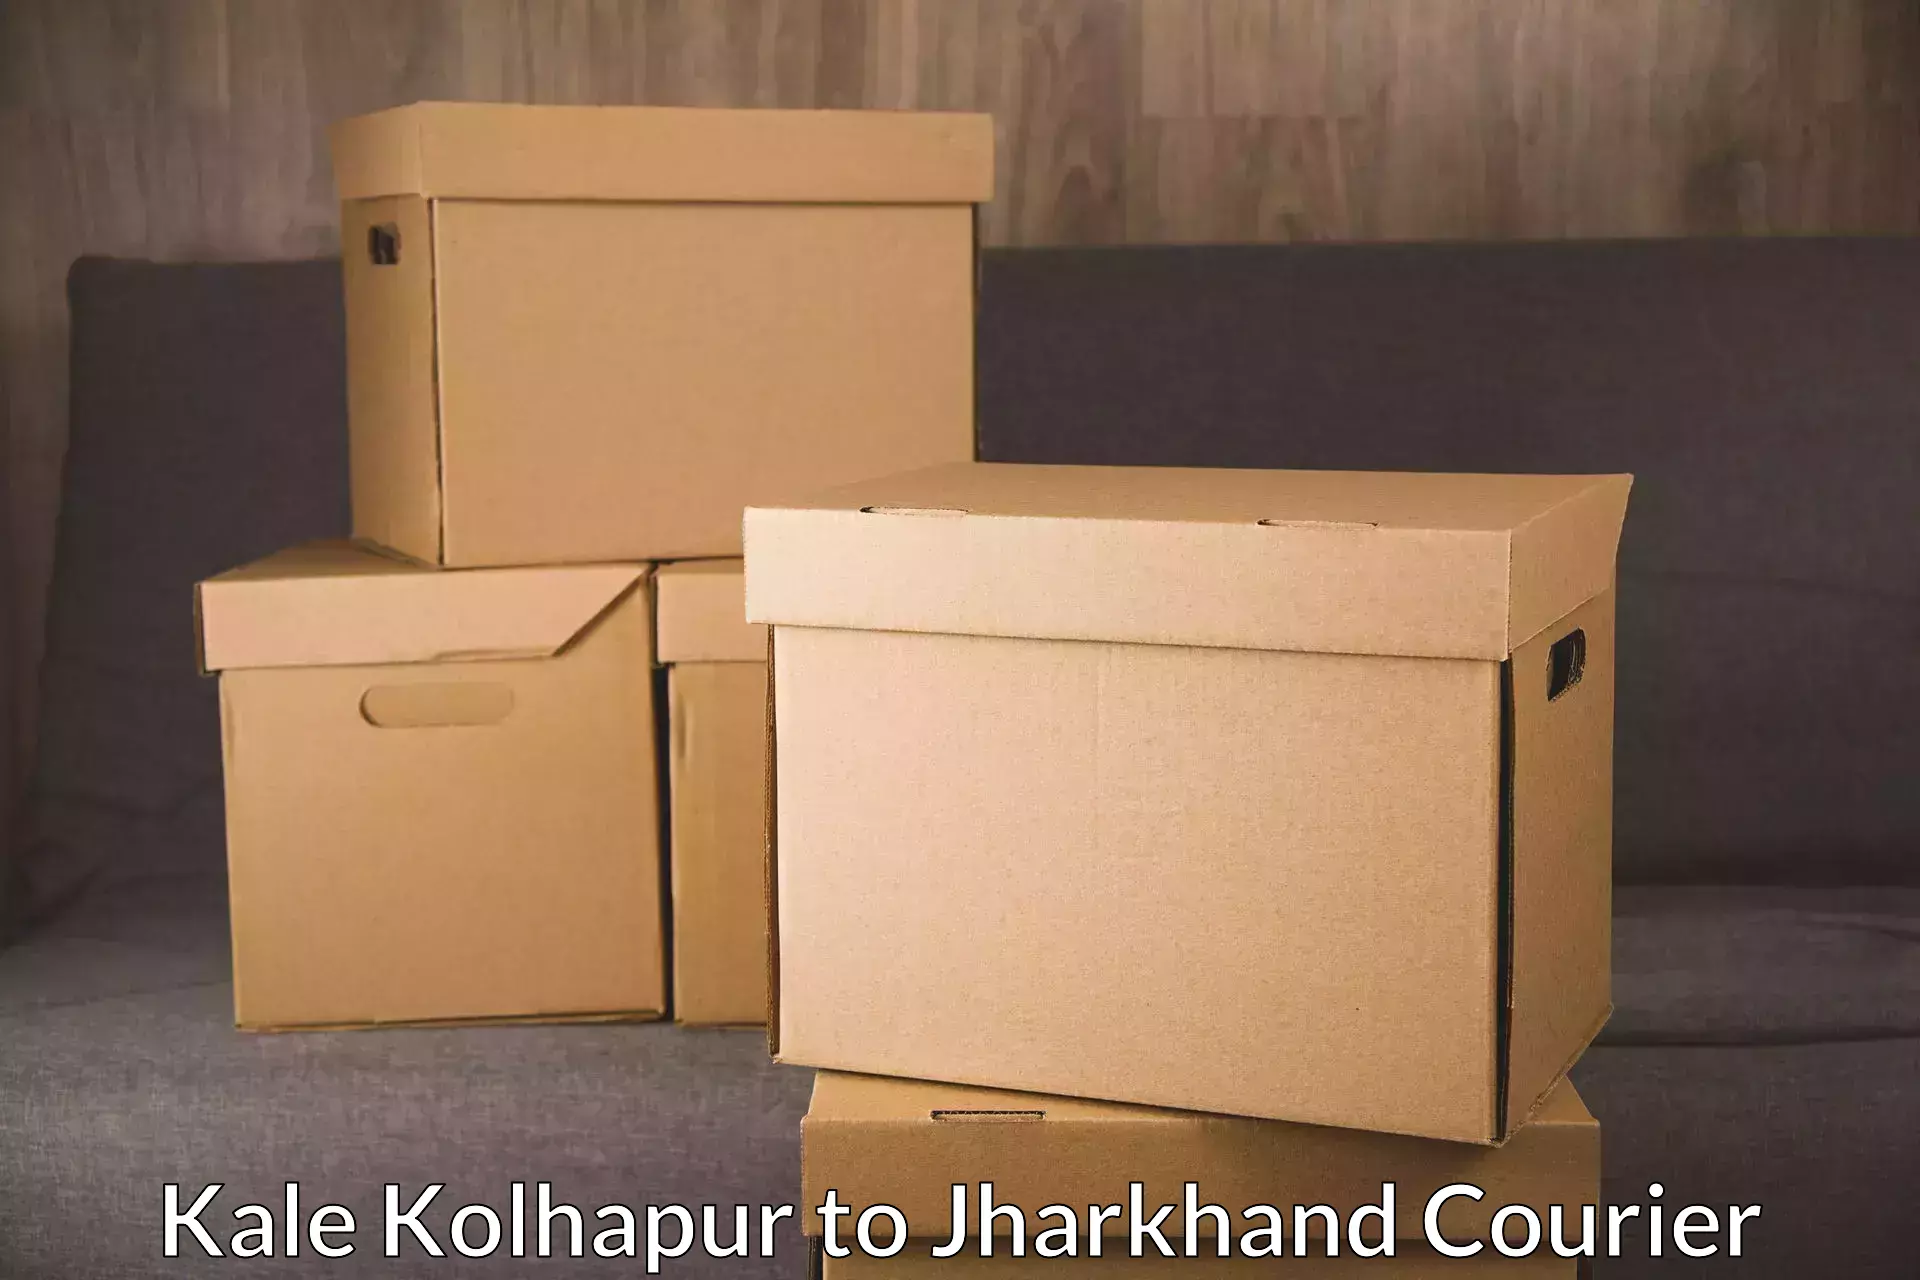 Express delivery solutions Kale Kolhapur to Ranchi